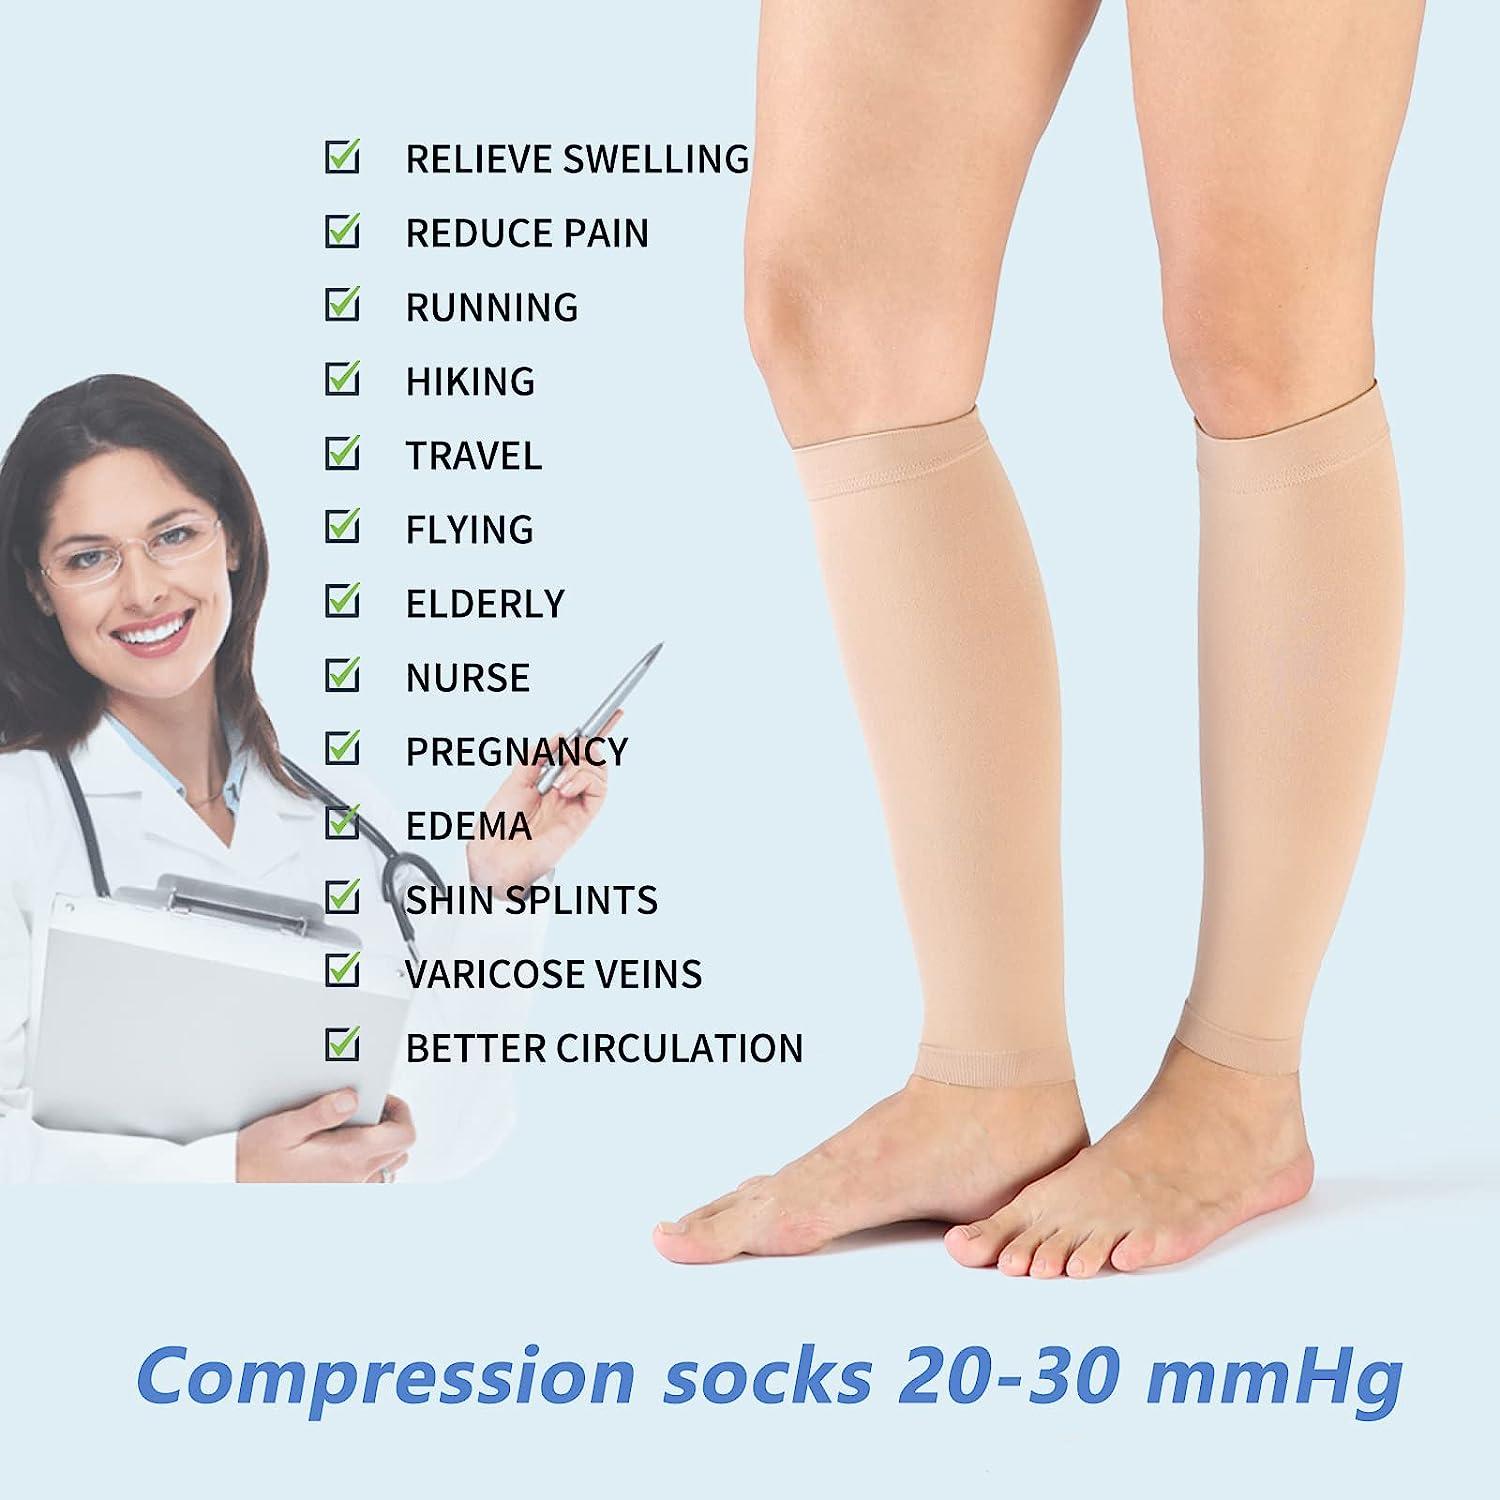 VARCOH Compression Socks For Women & Men,(2 Pairs)Calf Compression Sleeves  20-30mm Hg Firm Support Graduated Varicose Veins Hosiery,Indicated for  swelling, pregnancy, recovery, exercise, cycling Large Beige